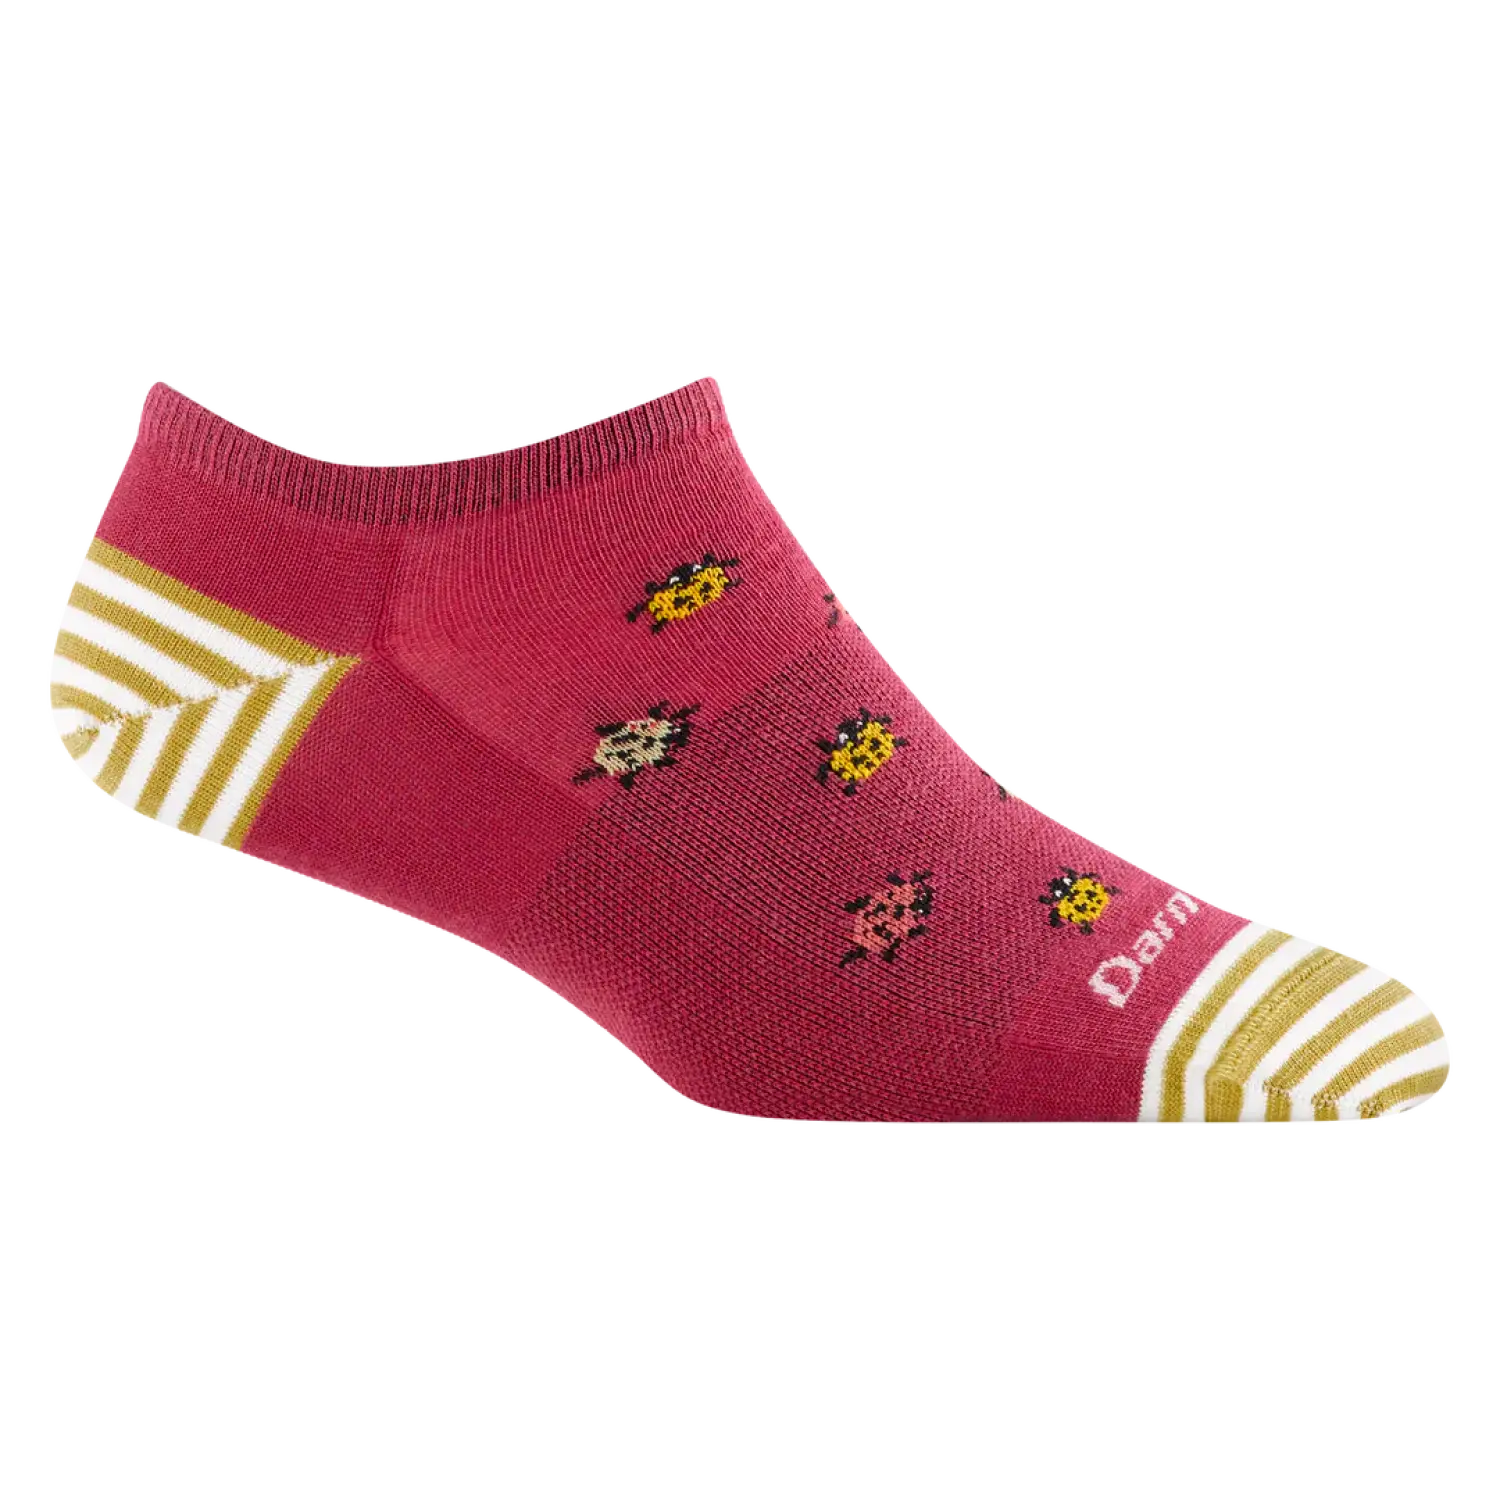 Darn Tough Women's Lucky Lady No Show Lightweight Lifestyle Sock shown in the Cranberry color option.